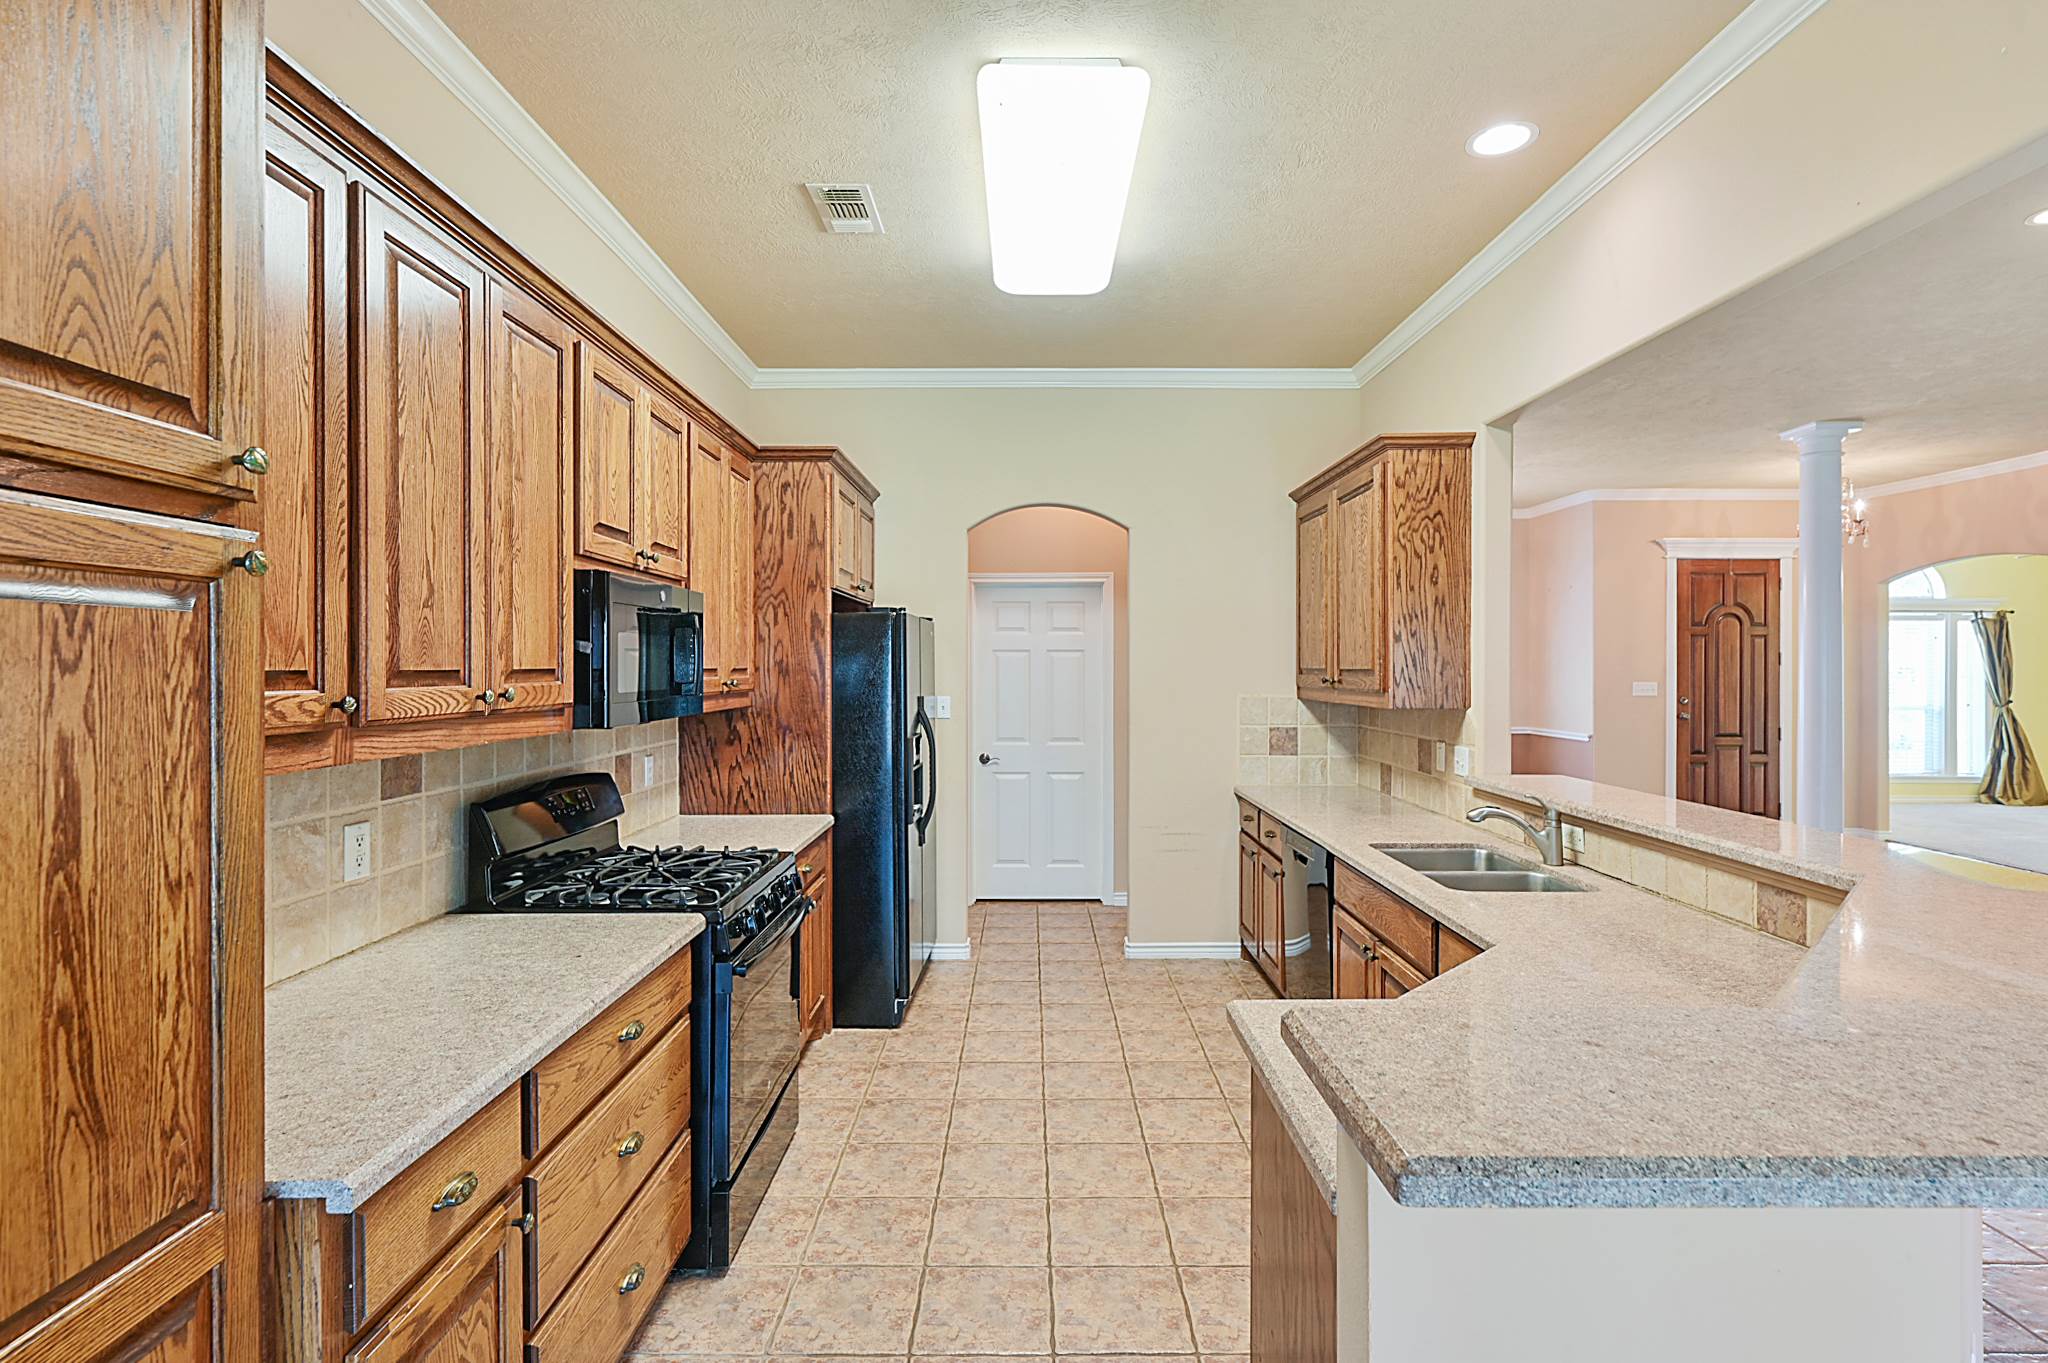 4405 Appleby Place, College Station, TX 77845